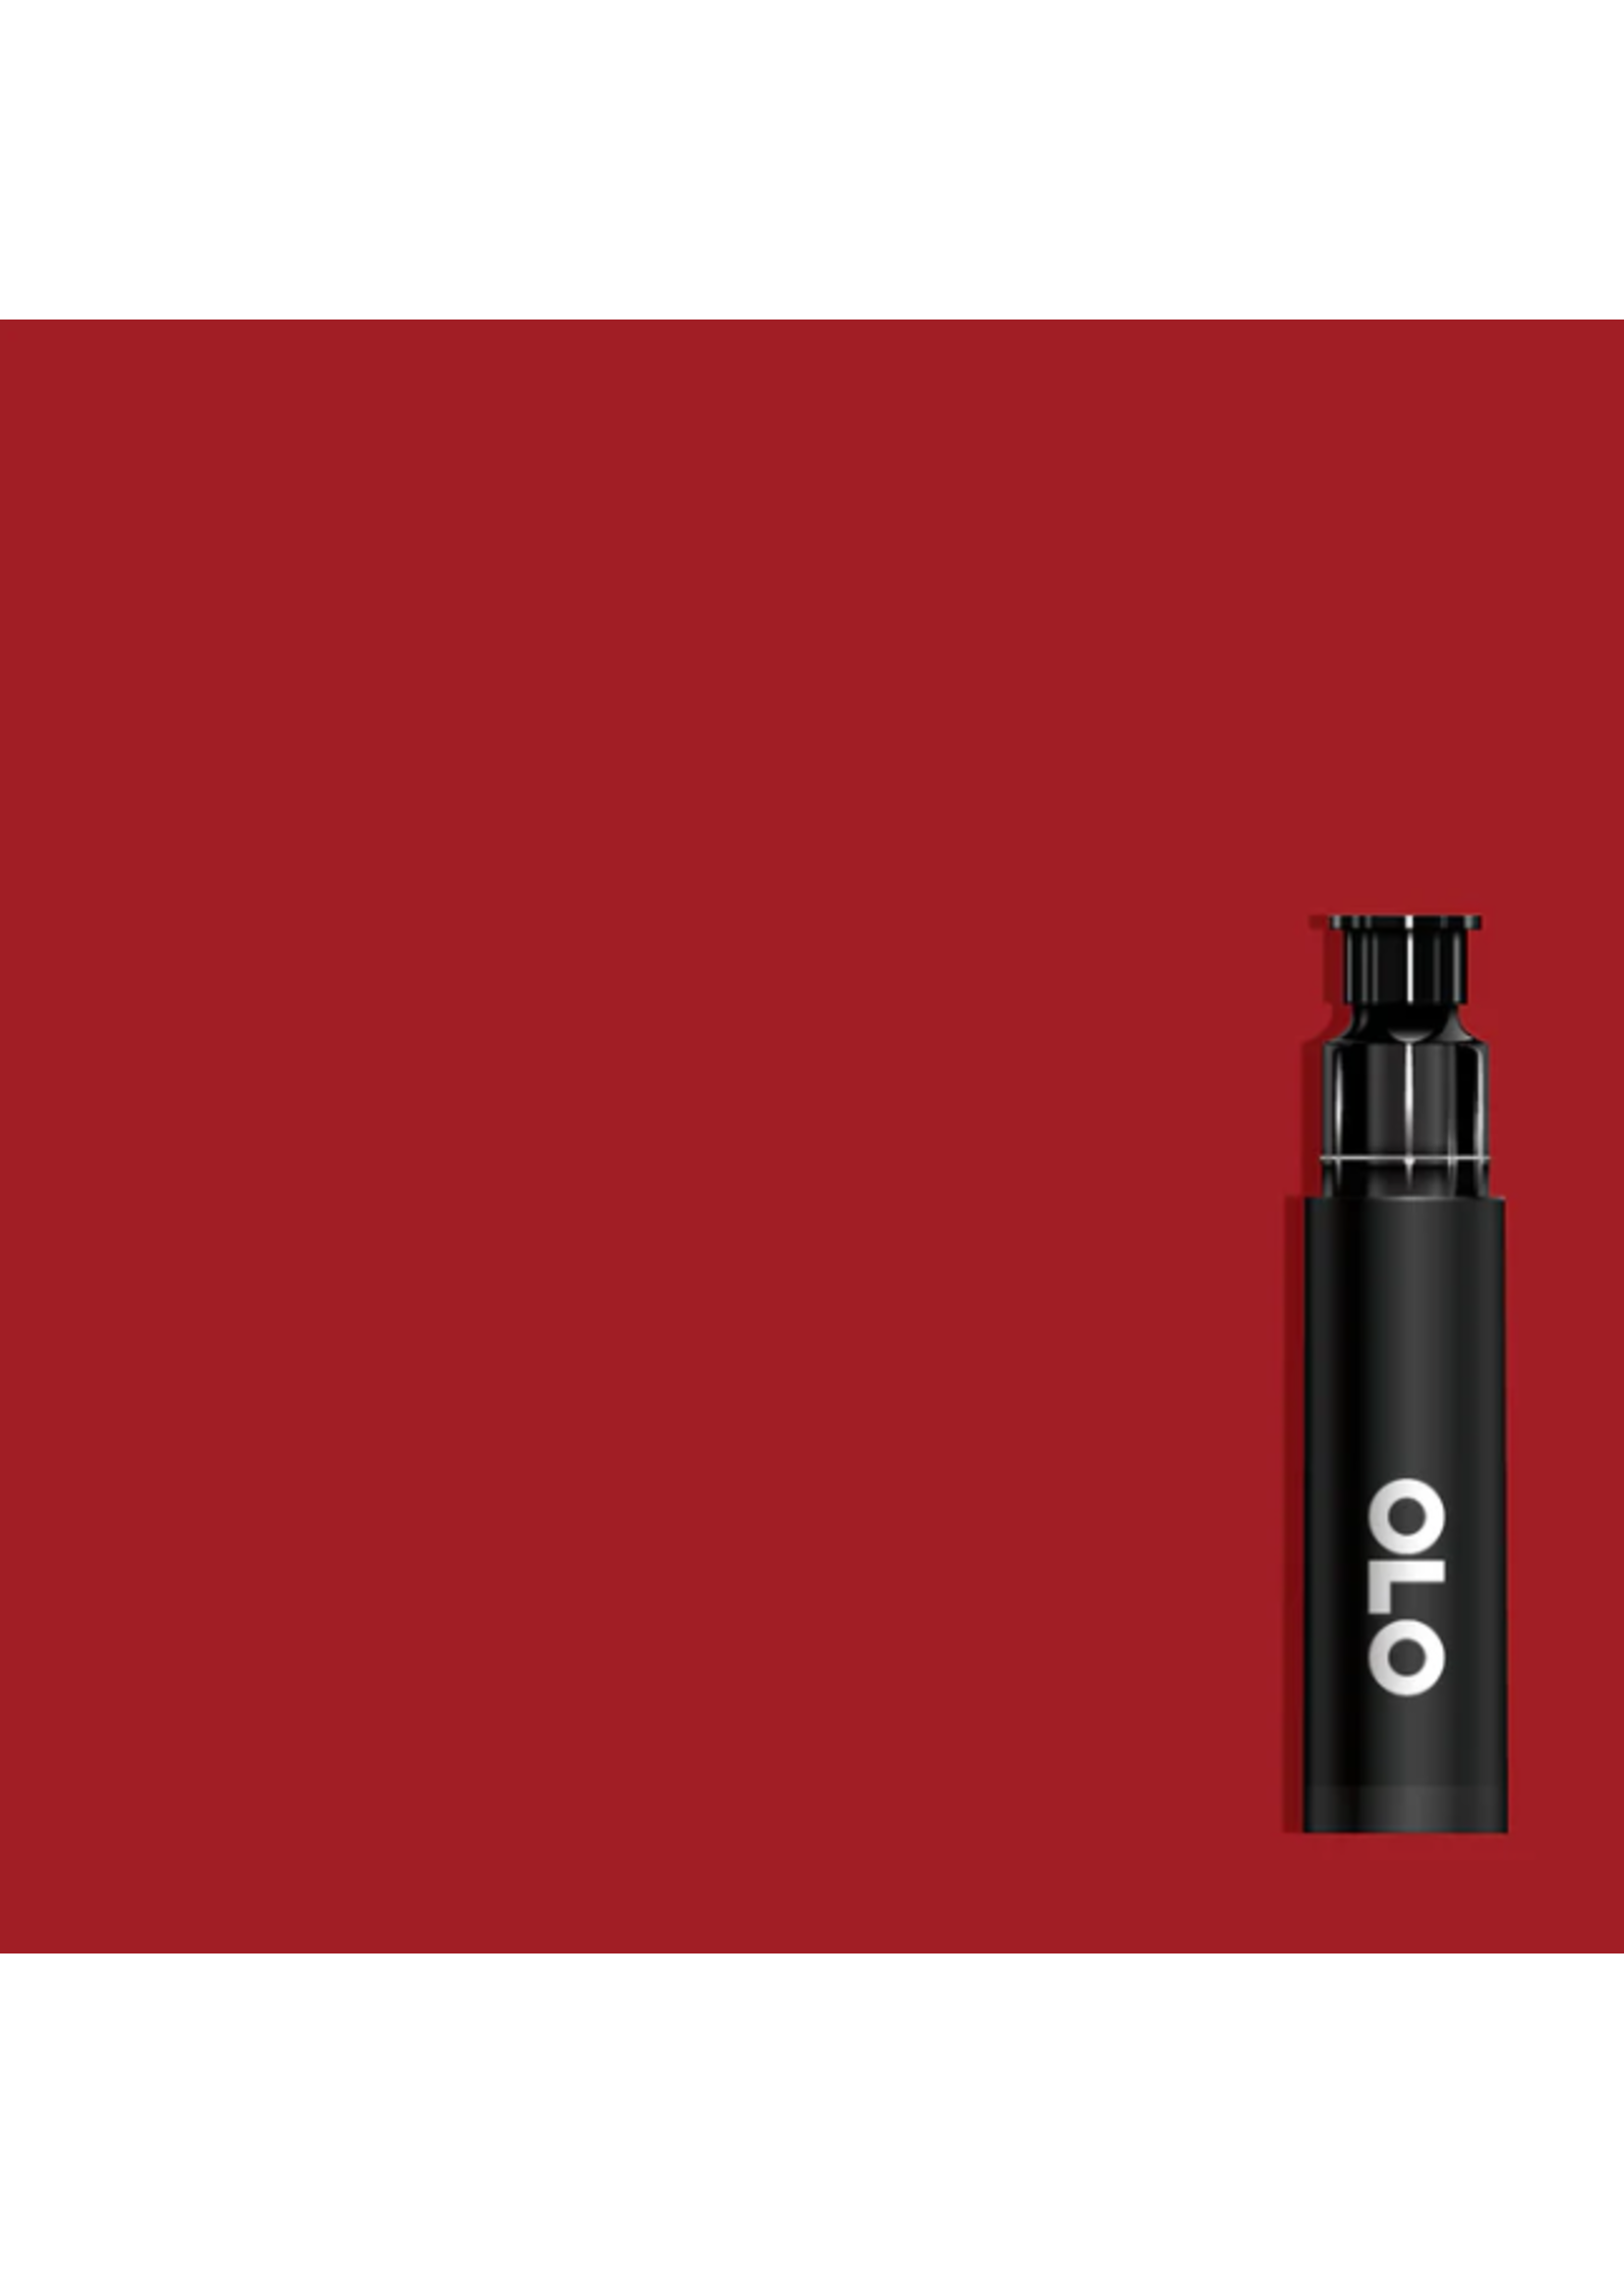 OLO OLO Brush Replacement Cartridge: Cranberry